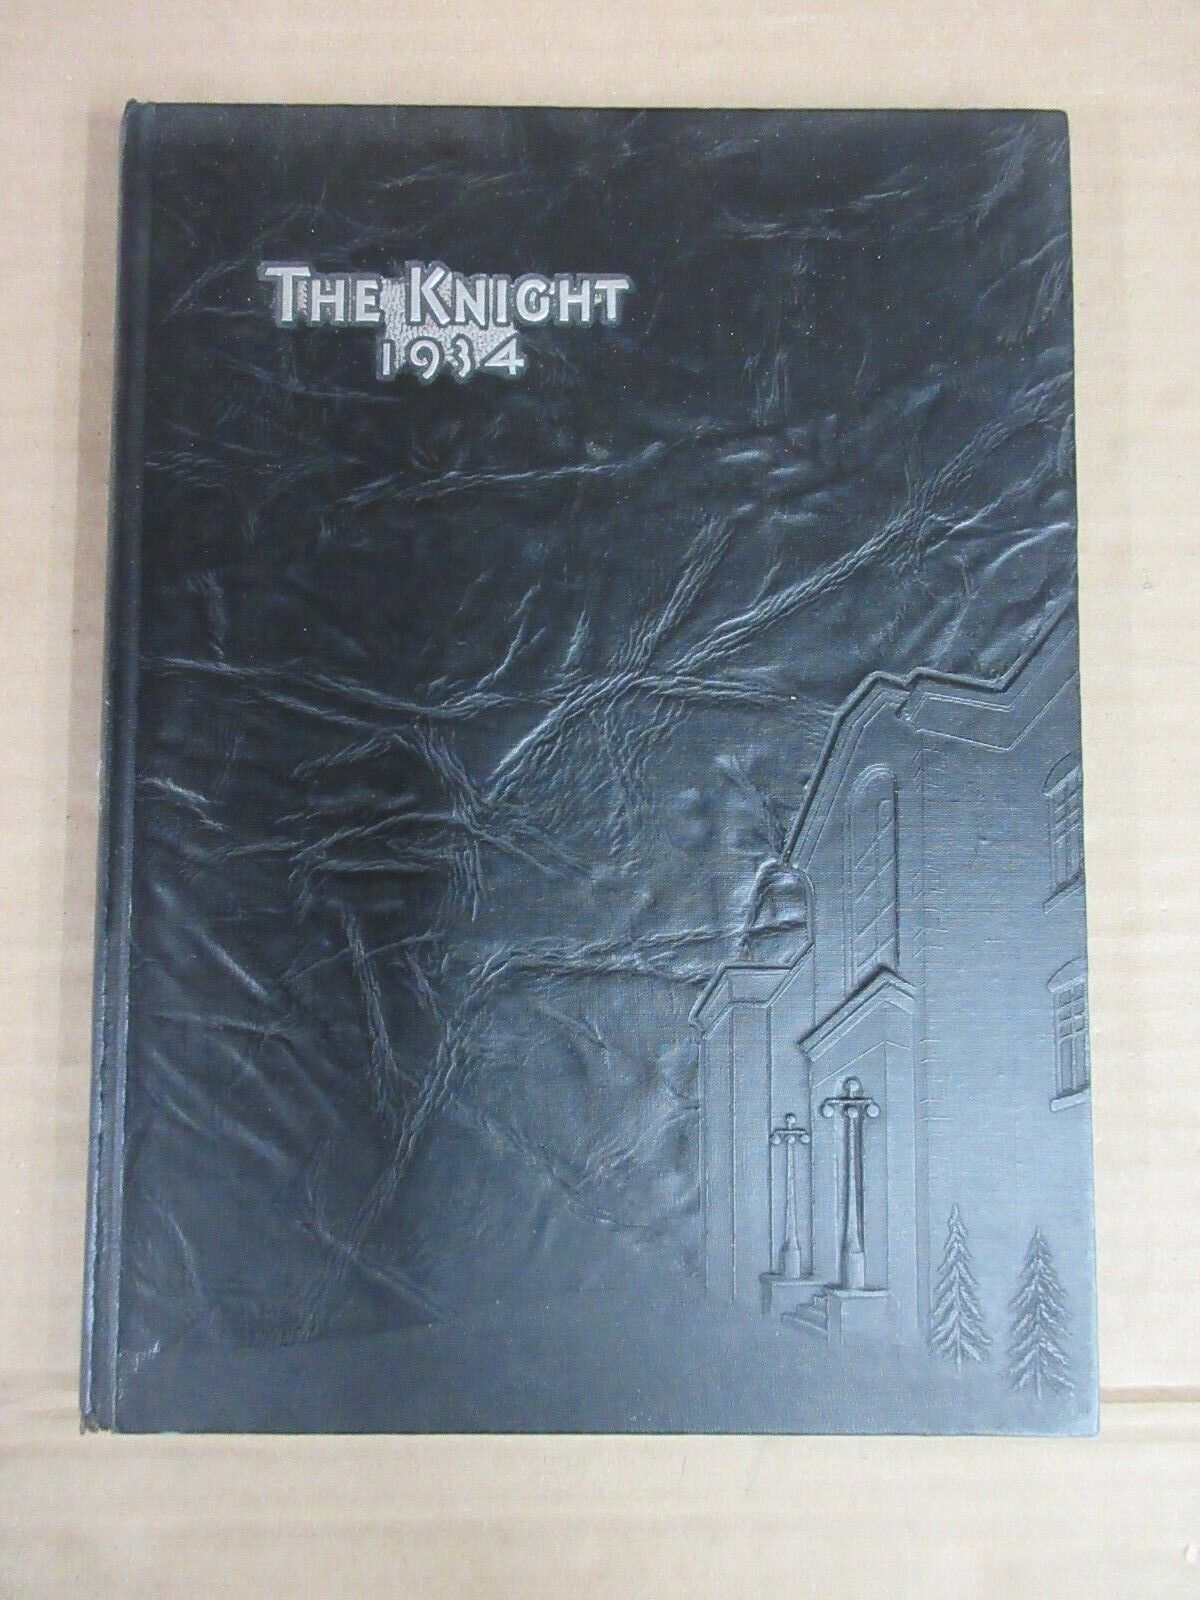 Vintage The Knight 1934 Yearbook Collingswood High School Collingswood NJ  